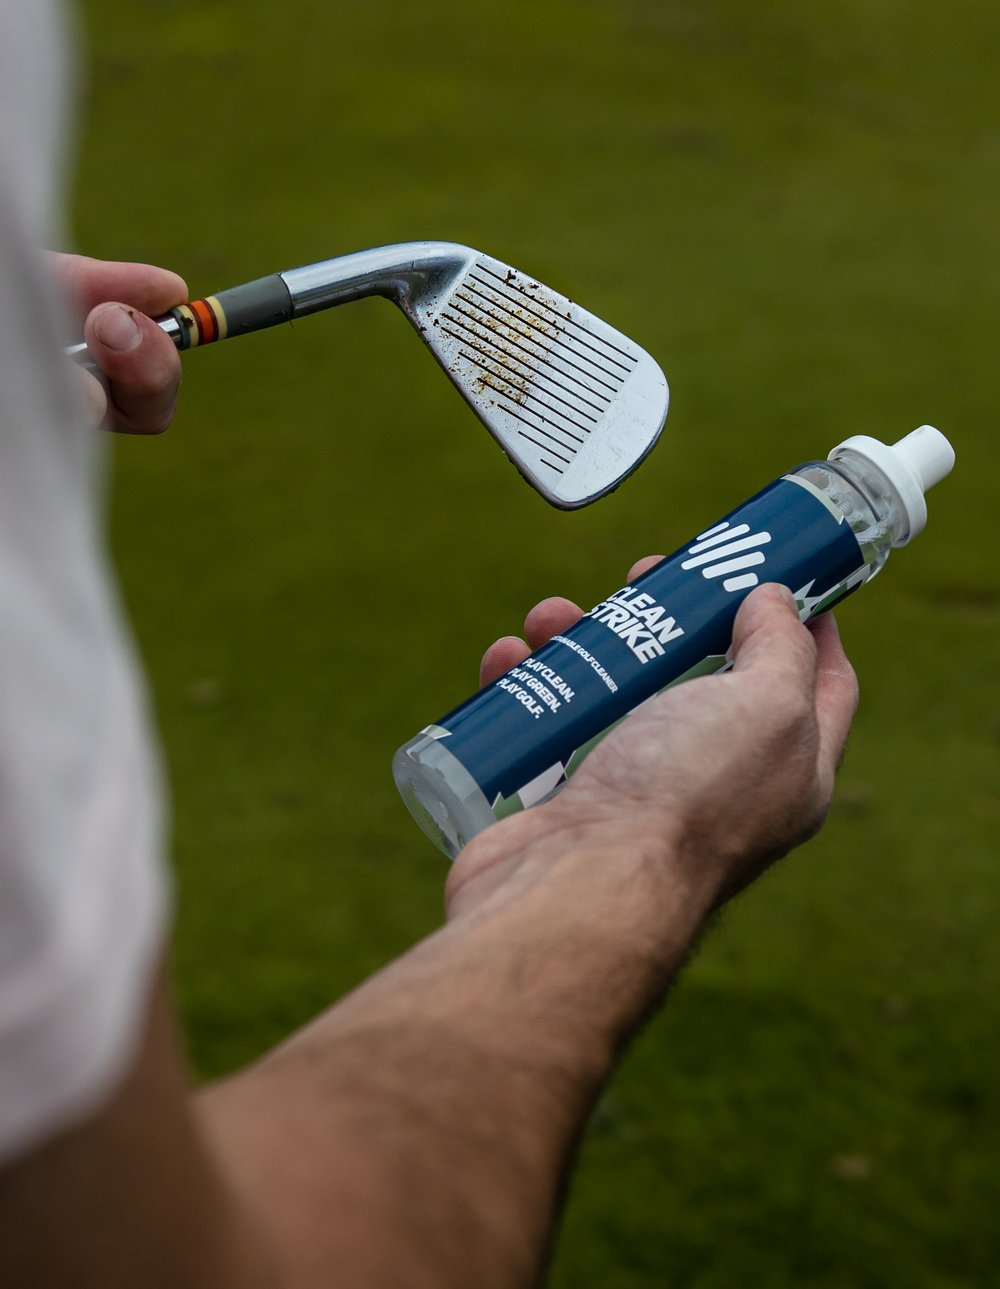 Golf+Club+Cleaning+Solution